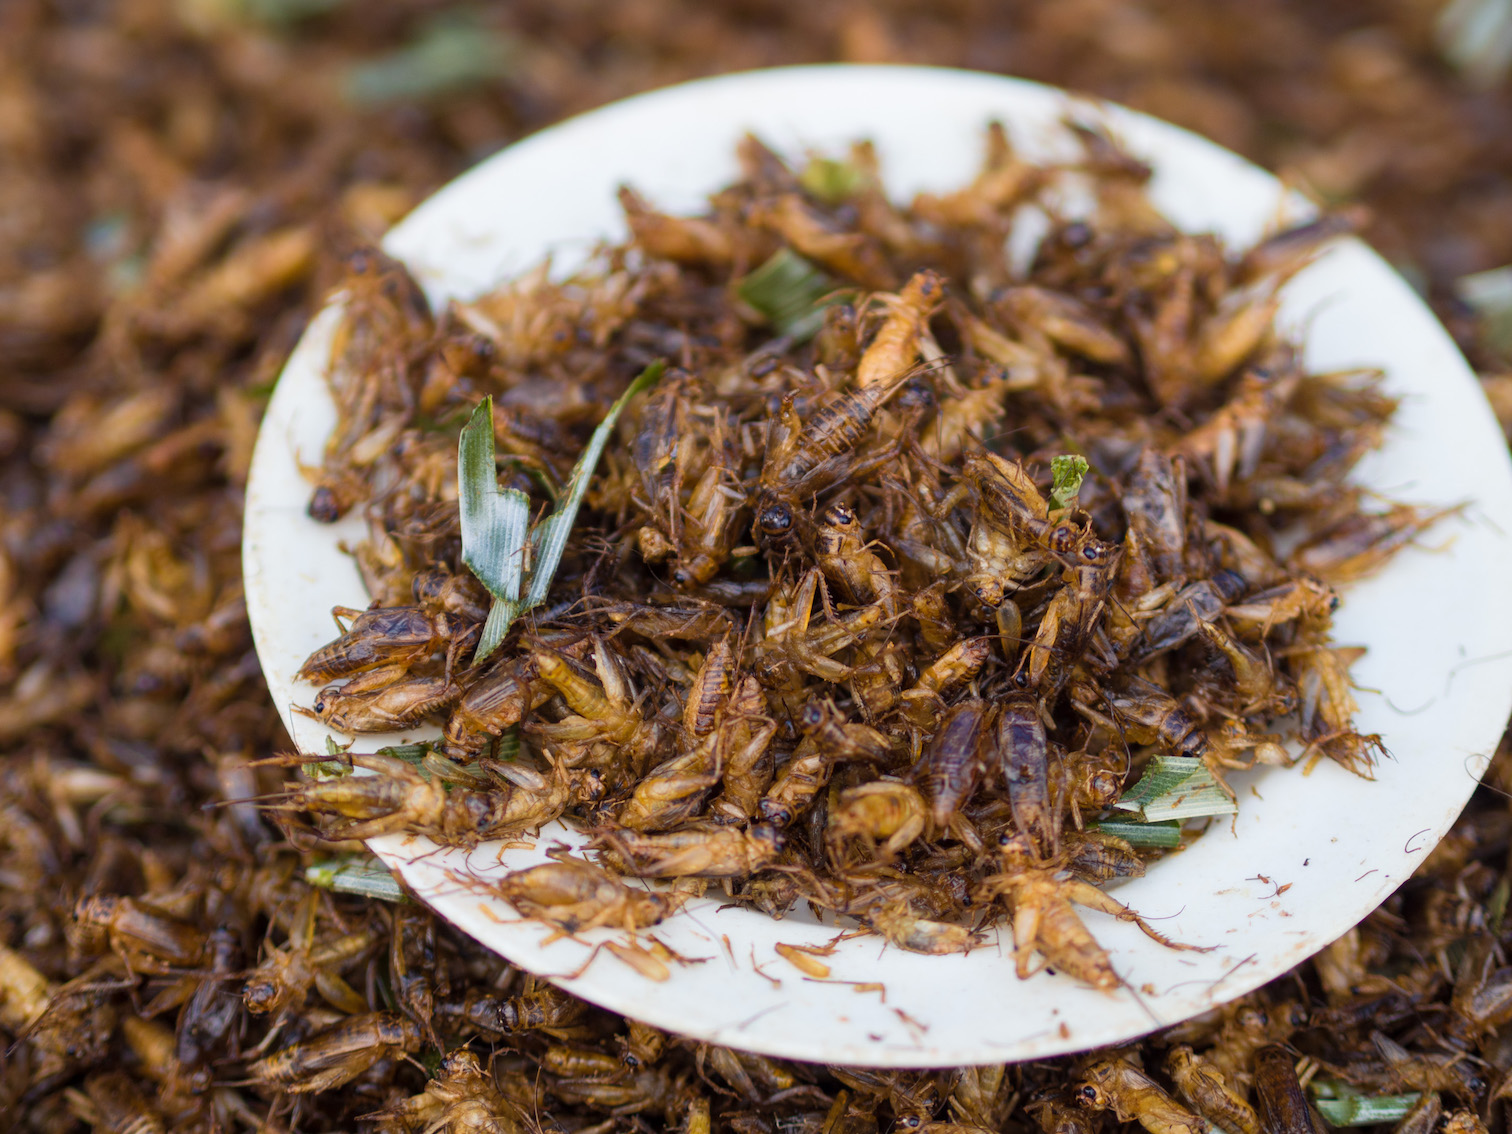 Image: Canadian government spends $8.5 million on insect production facility to force people to eat BUGS